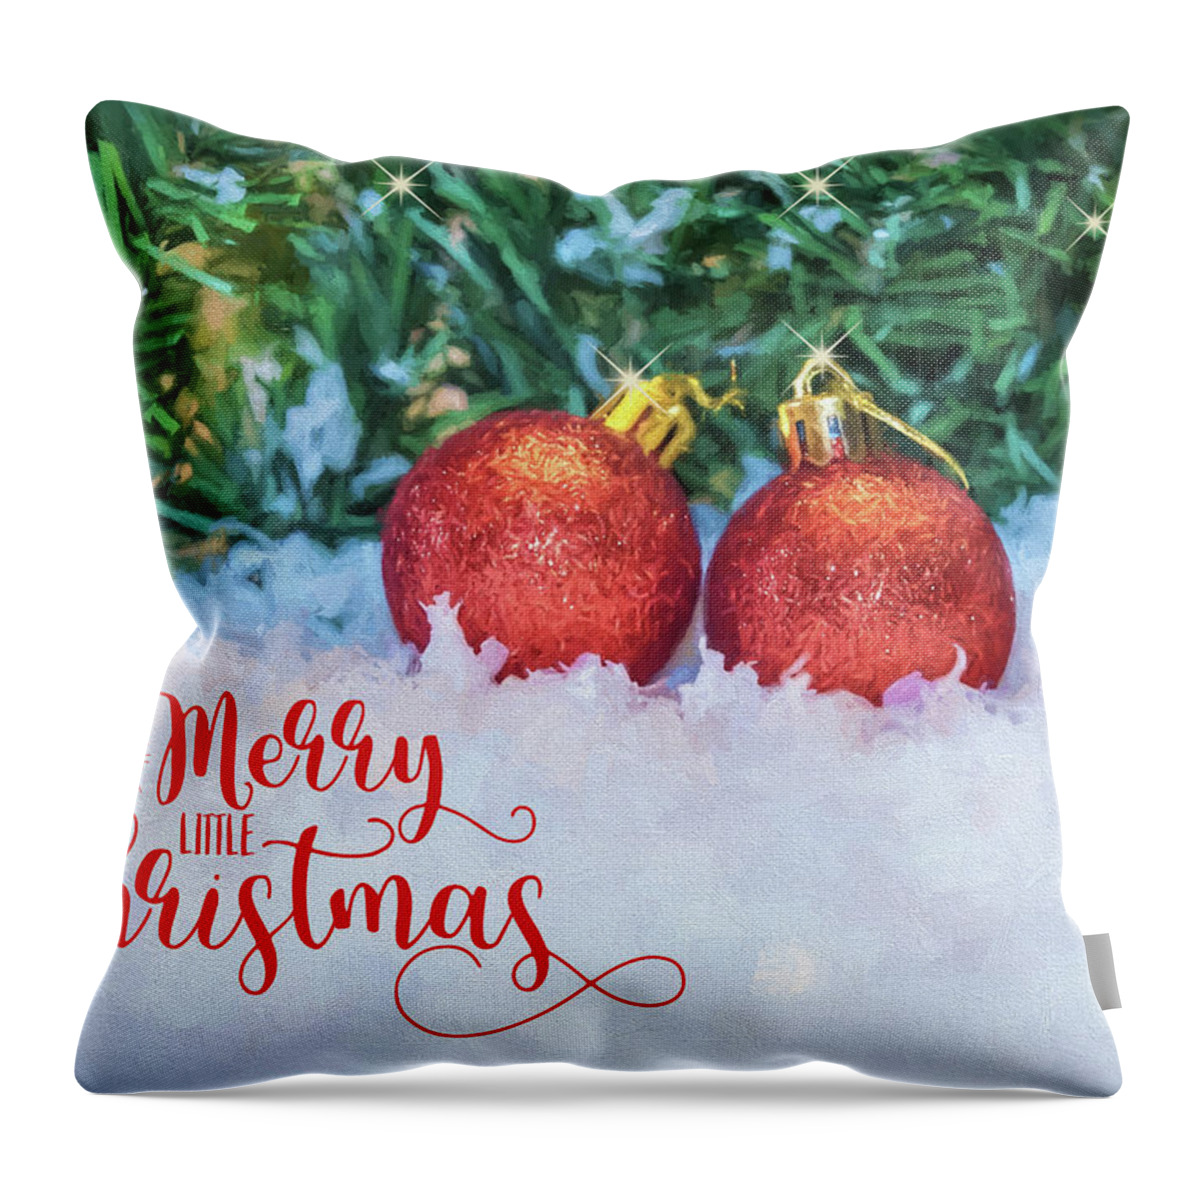 Pines Throw Pillow featuring the photograph Merry Christmas by Cathy Kovarik